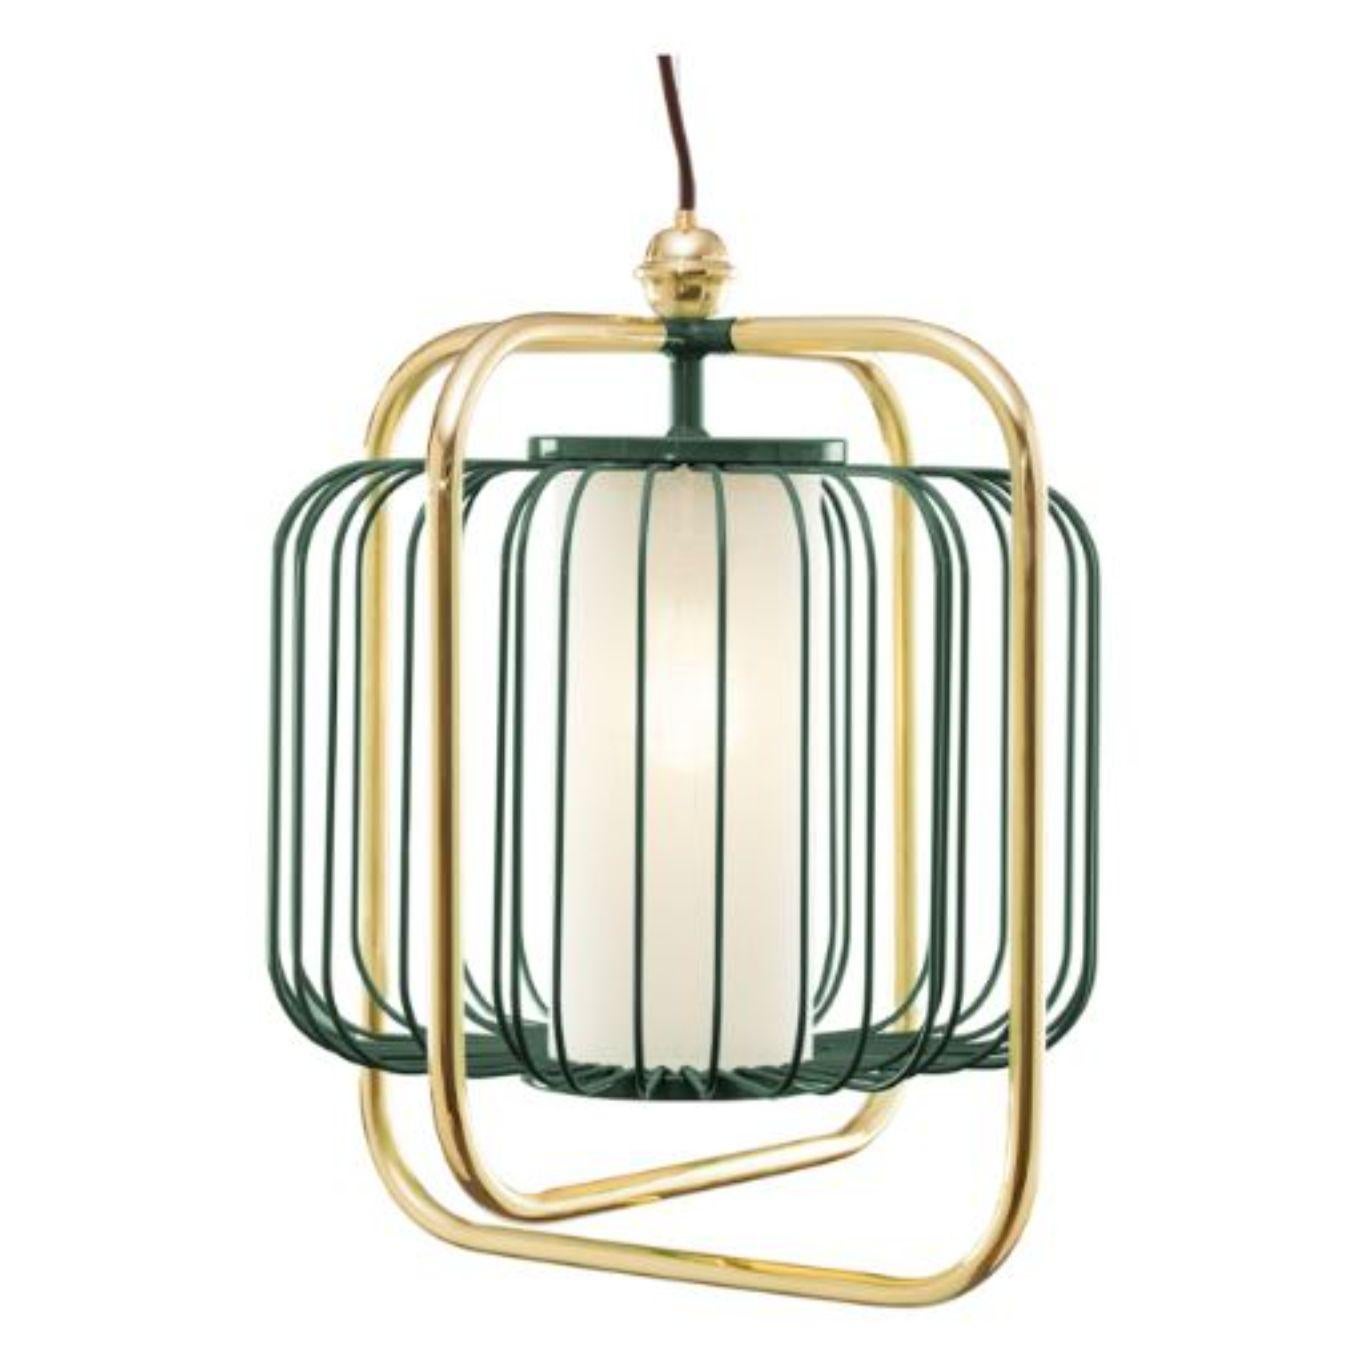 Brass and Moss Jules III suspension lamp by Dooq
Dimensions: W 38 x D 38 x H 44 cm
Materials: lacquered metal, polished or brushed metal, brass.
abat-jour: cotton
Also available in different colors and materials.